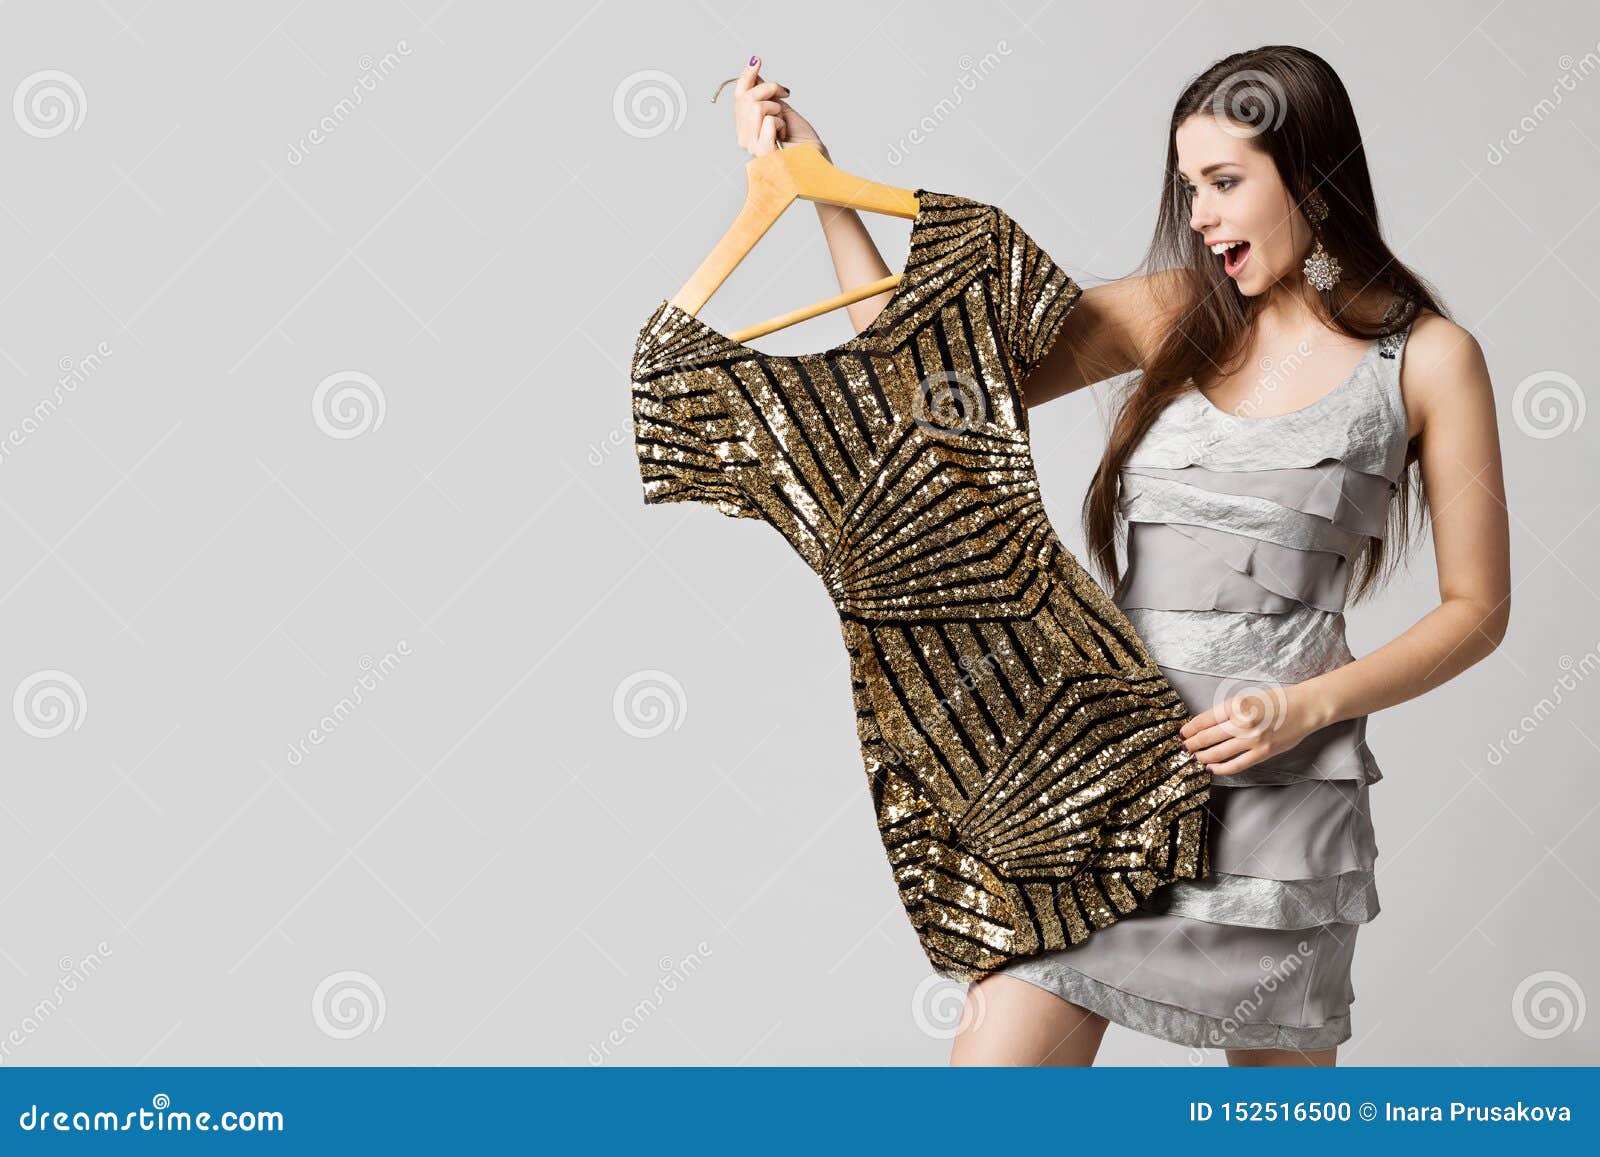 happy woman choosing dress, attractive girl holding gold clothes on hanger on white